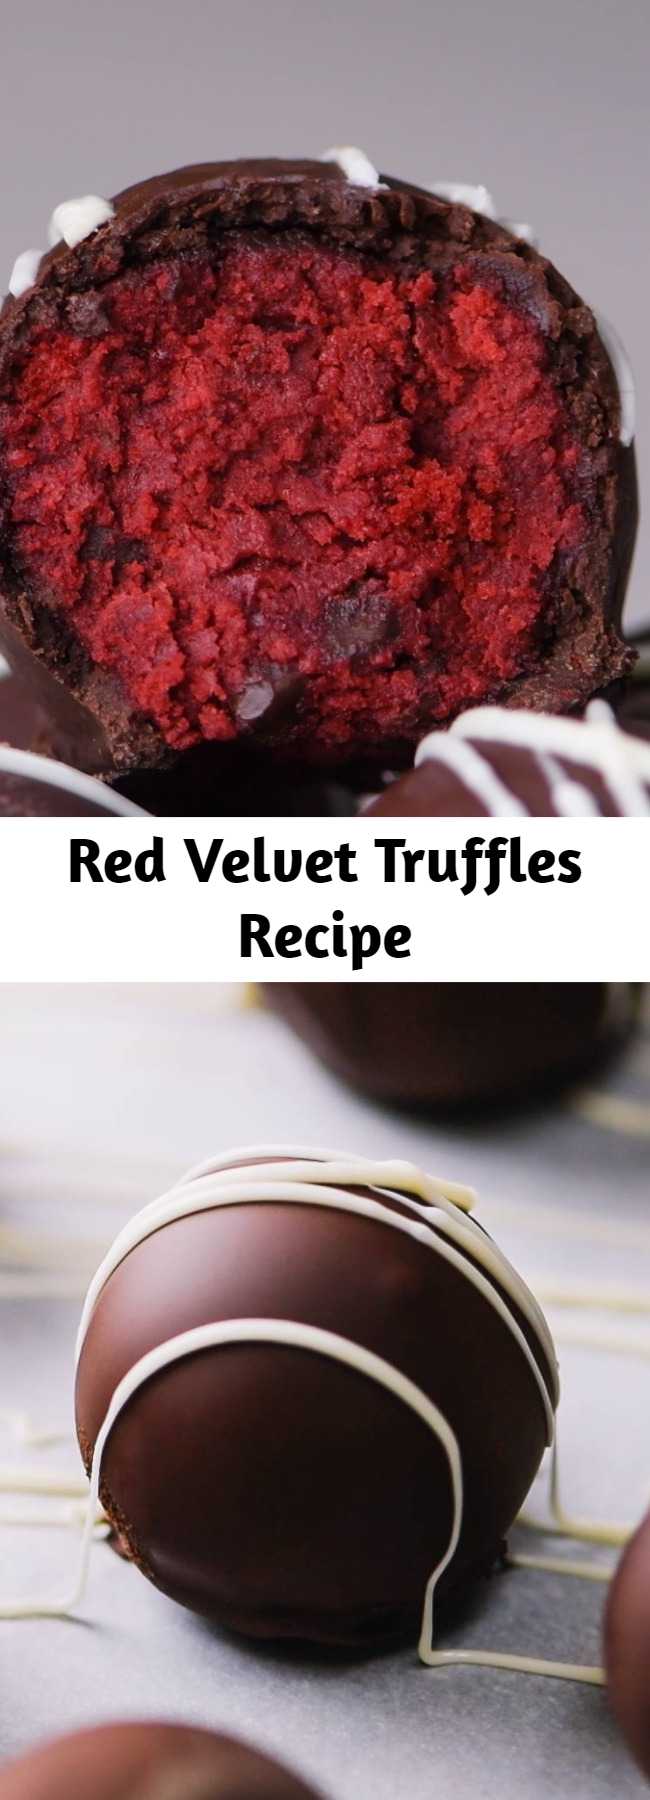 Red Velvet Truffles Recipe - This perfect delicious treat will keep your mouth watering! #desserts #chocolates #truffles